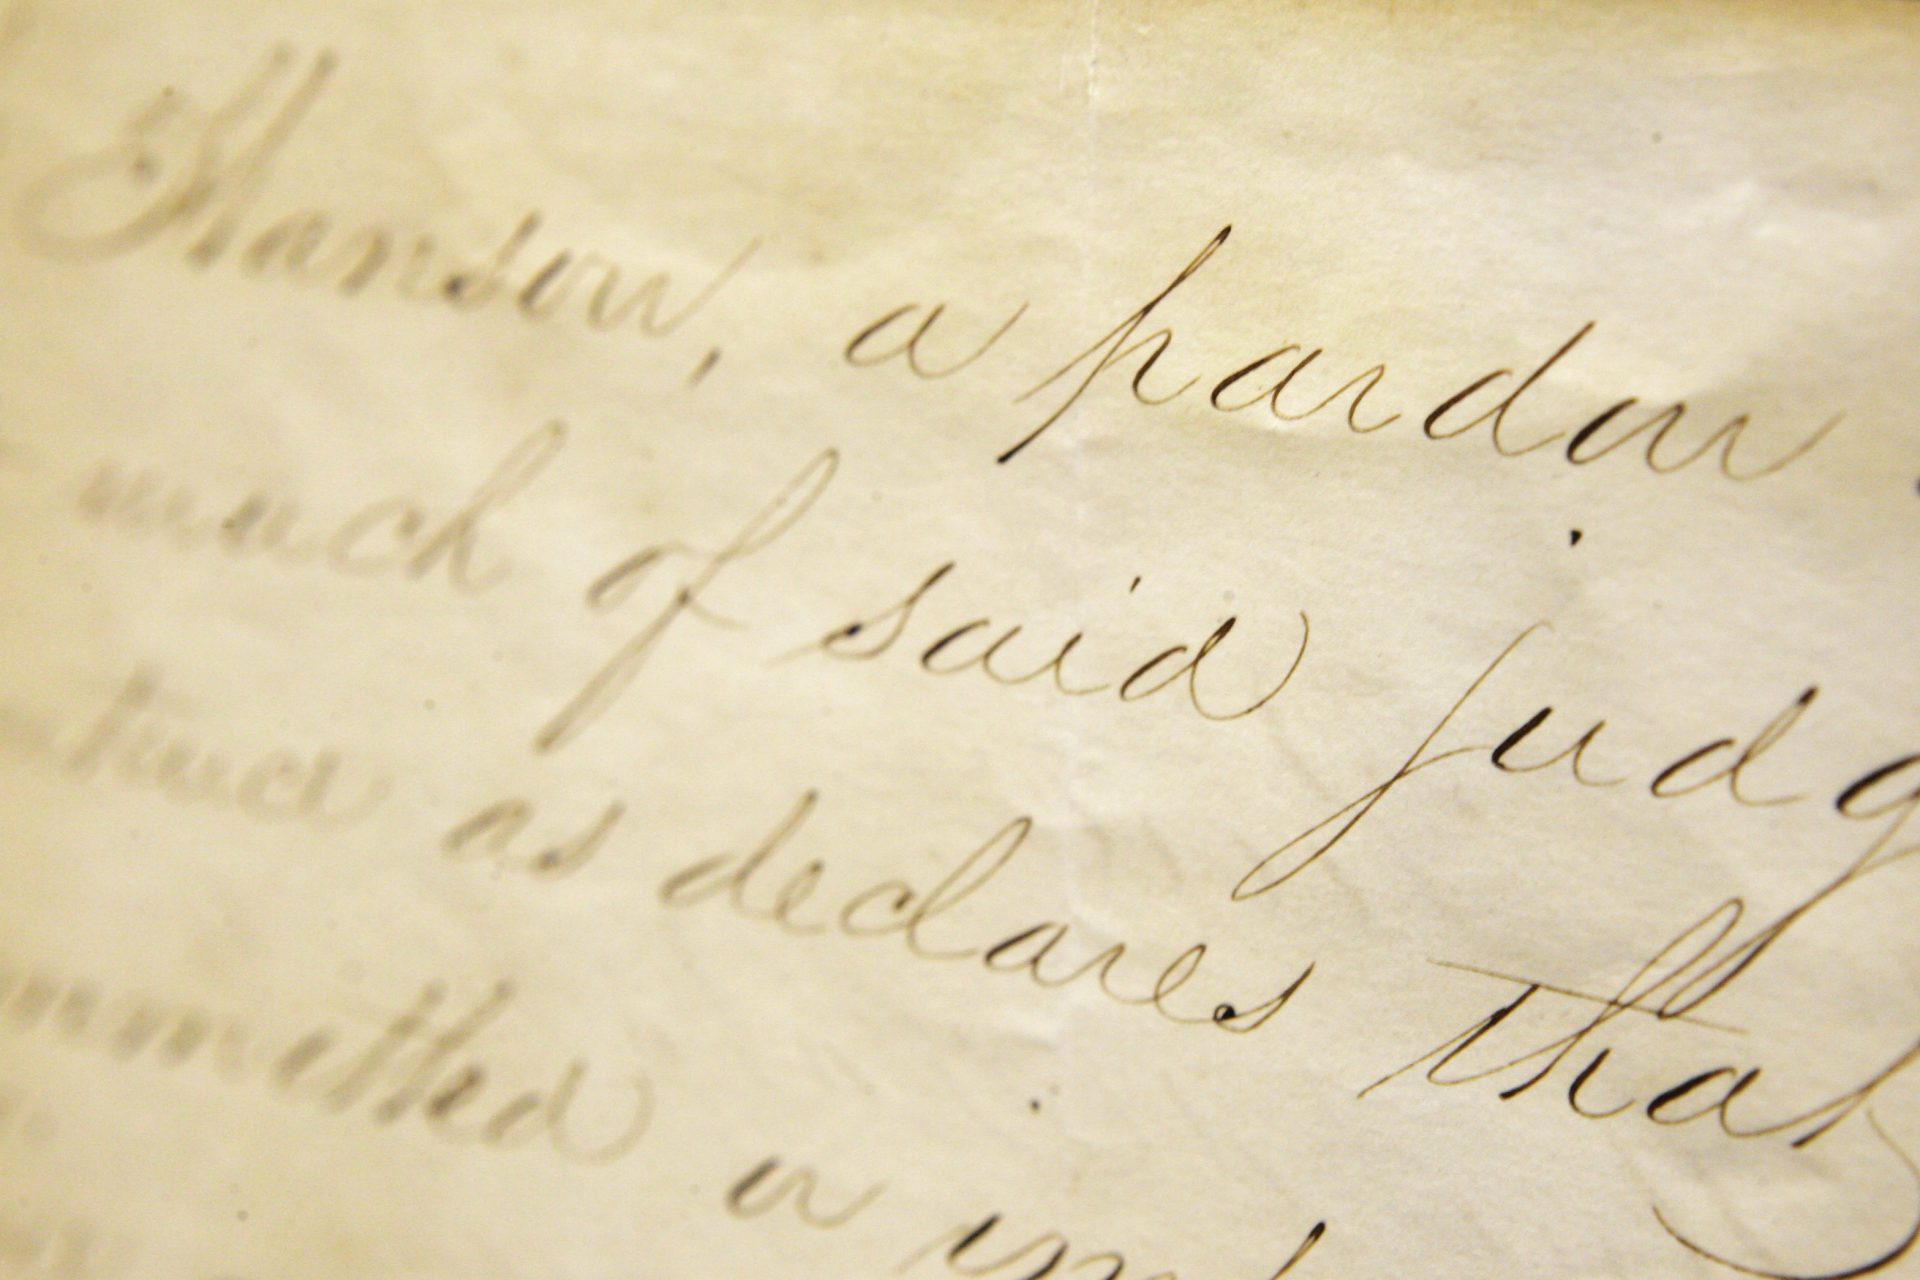 A detail of an 1854 presidential pardon document by President Franklin Pierce, which grants clemency to Noah C. Hanson who was convicted for harboring slaves, is displayed at The Raab Collection office in Philadelphia, Monday, July 16, 2007. The document went up for sale Monday.